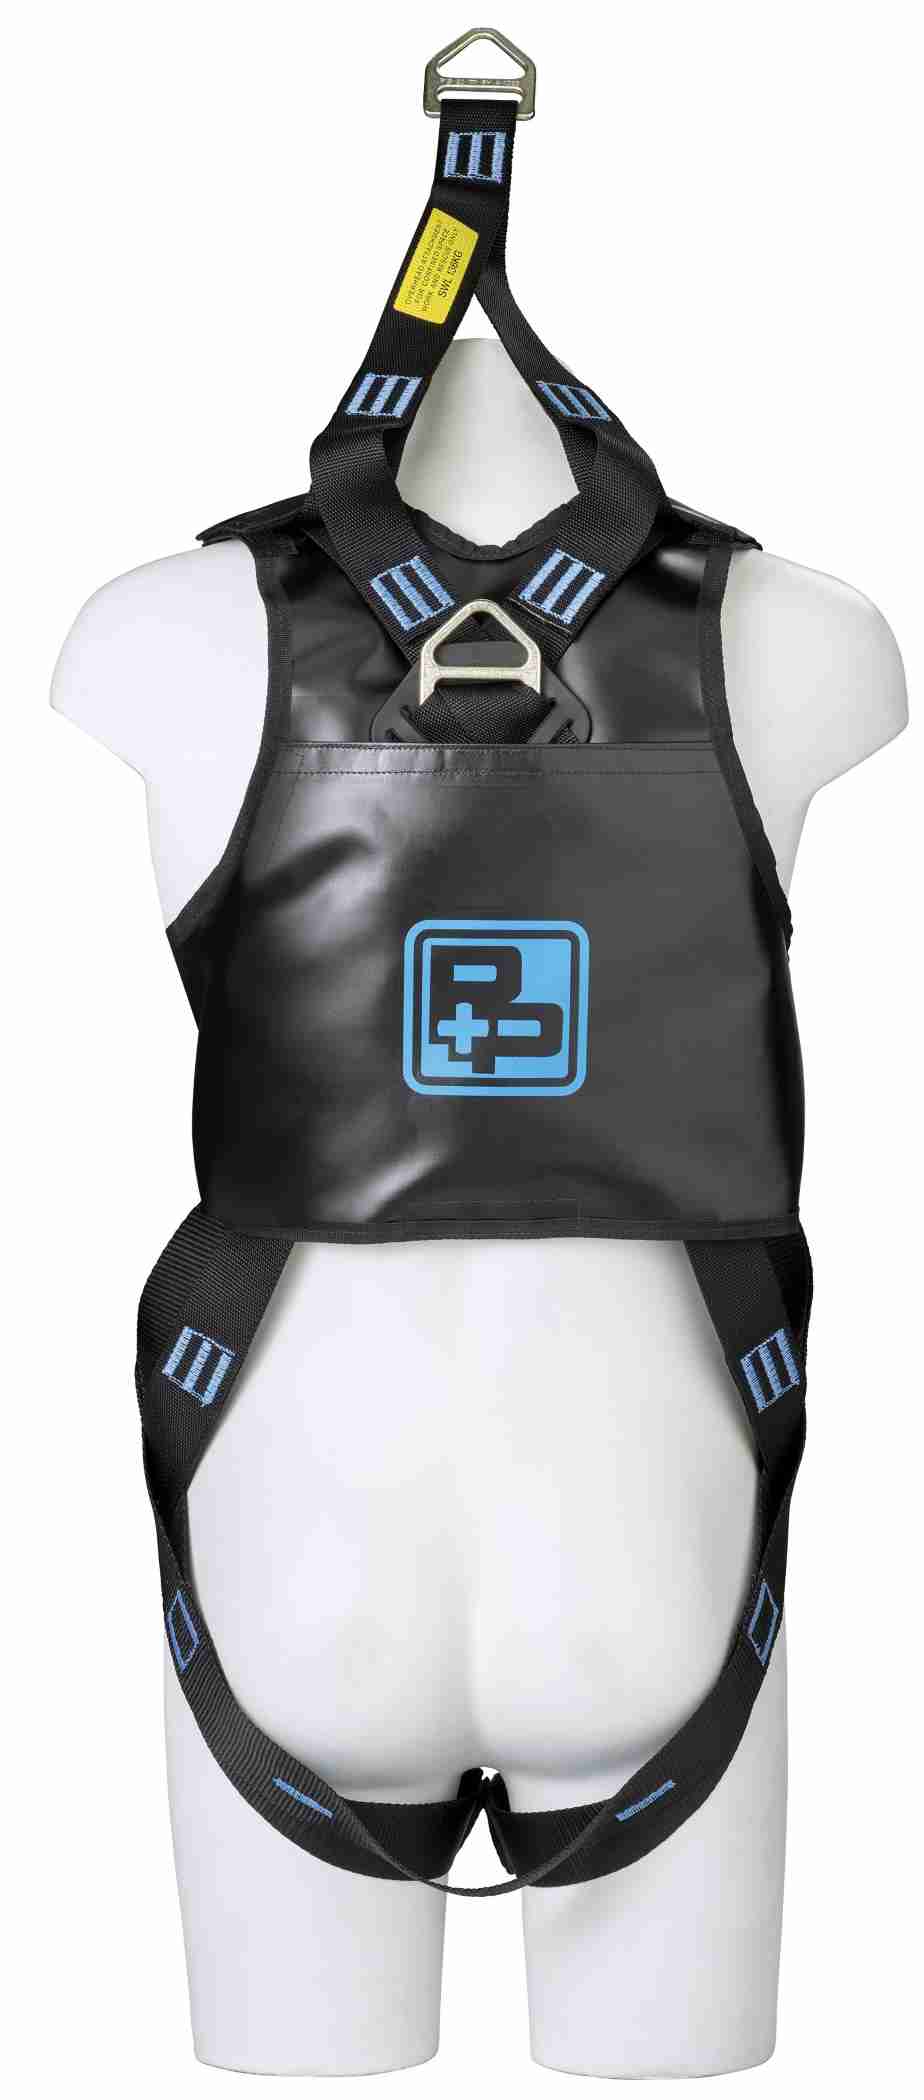 P+P Safety FRS Rescue Bolero Fall Arrest Harness 90096 - SecureHeights